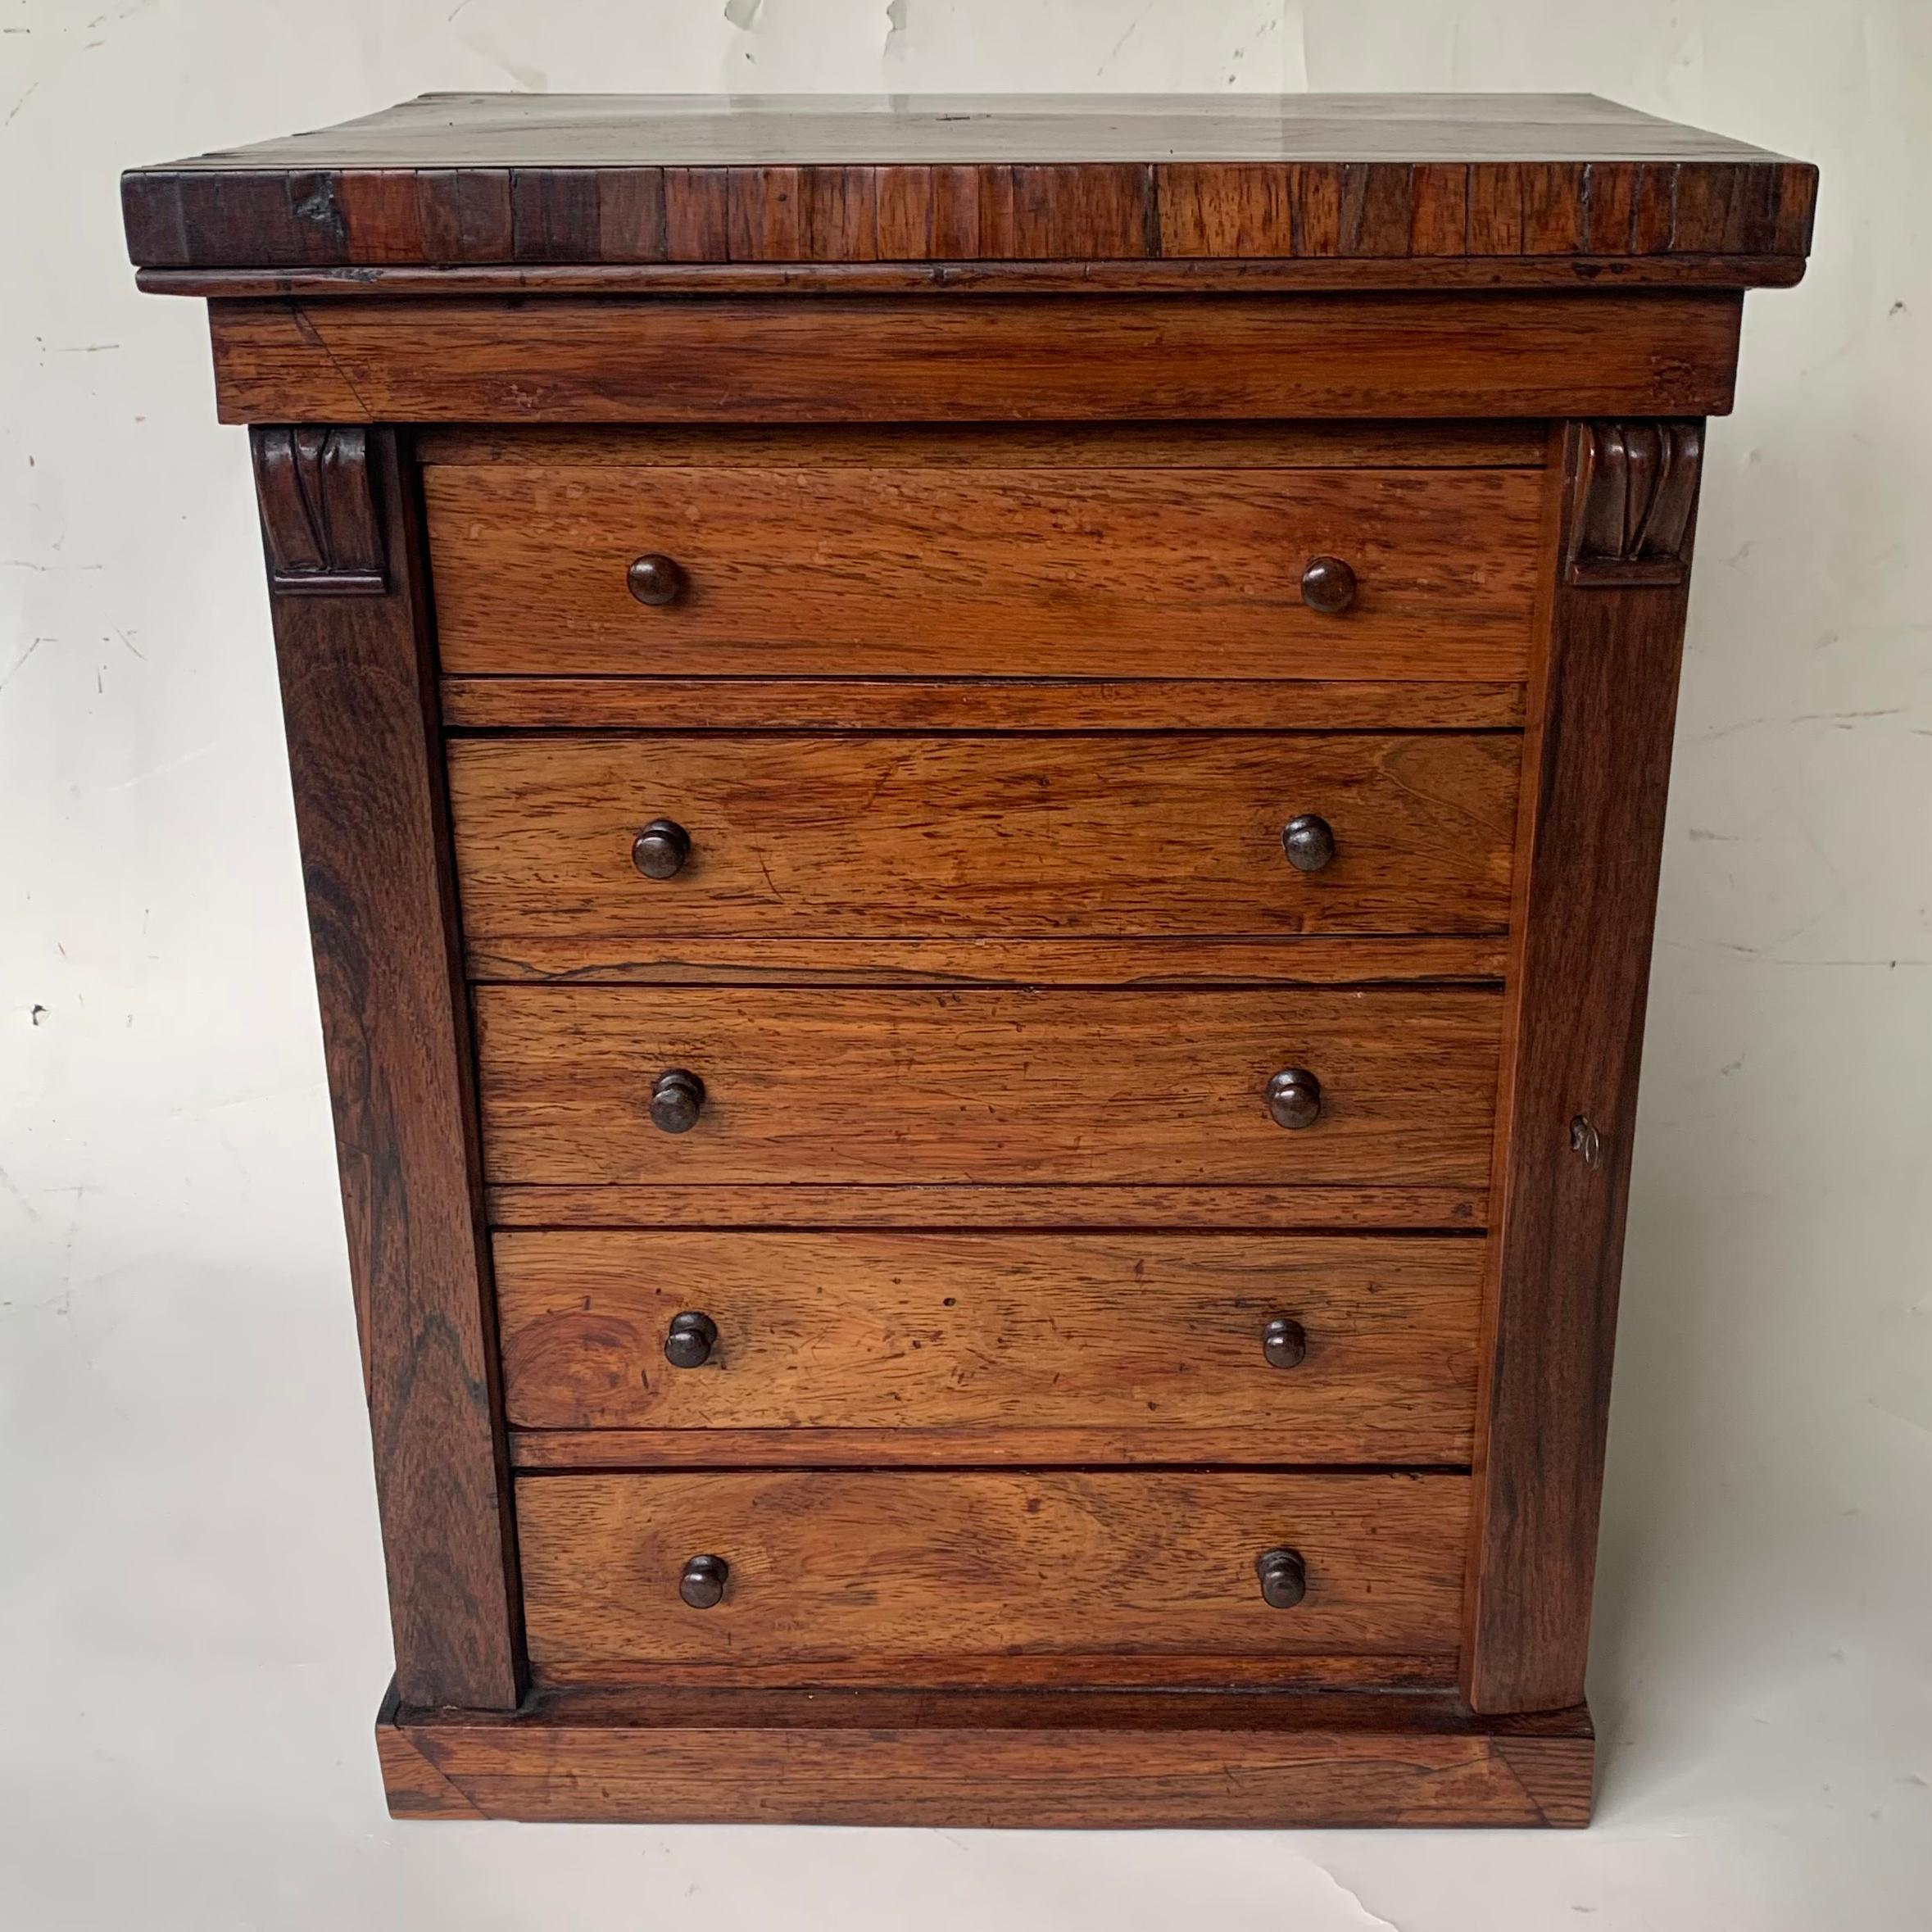 A charming early 19th century rosewood five drawer miniature Wellington chest with a stepped rectangular top above five graduated drawers which are all locked by the hinged side pilaster on the right, and standing on a plain plinth base.